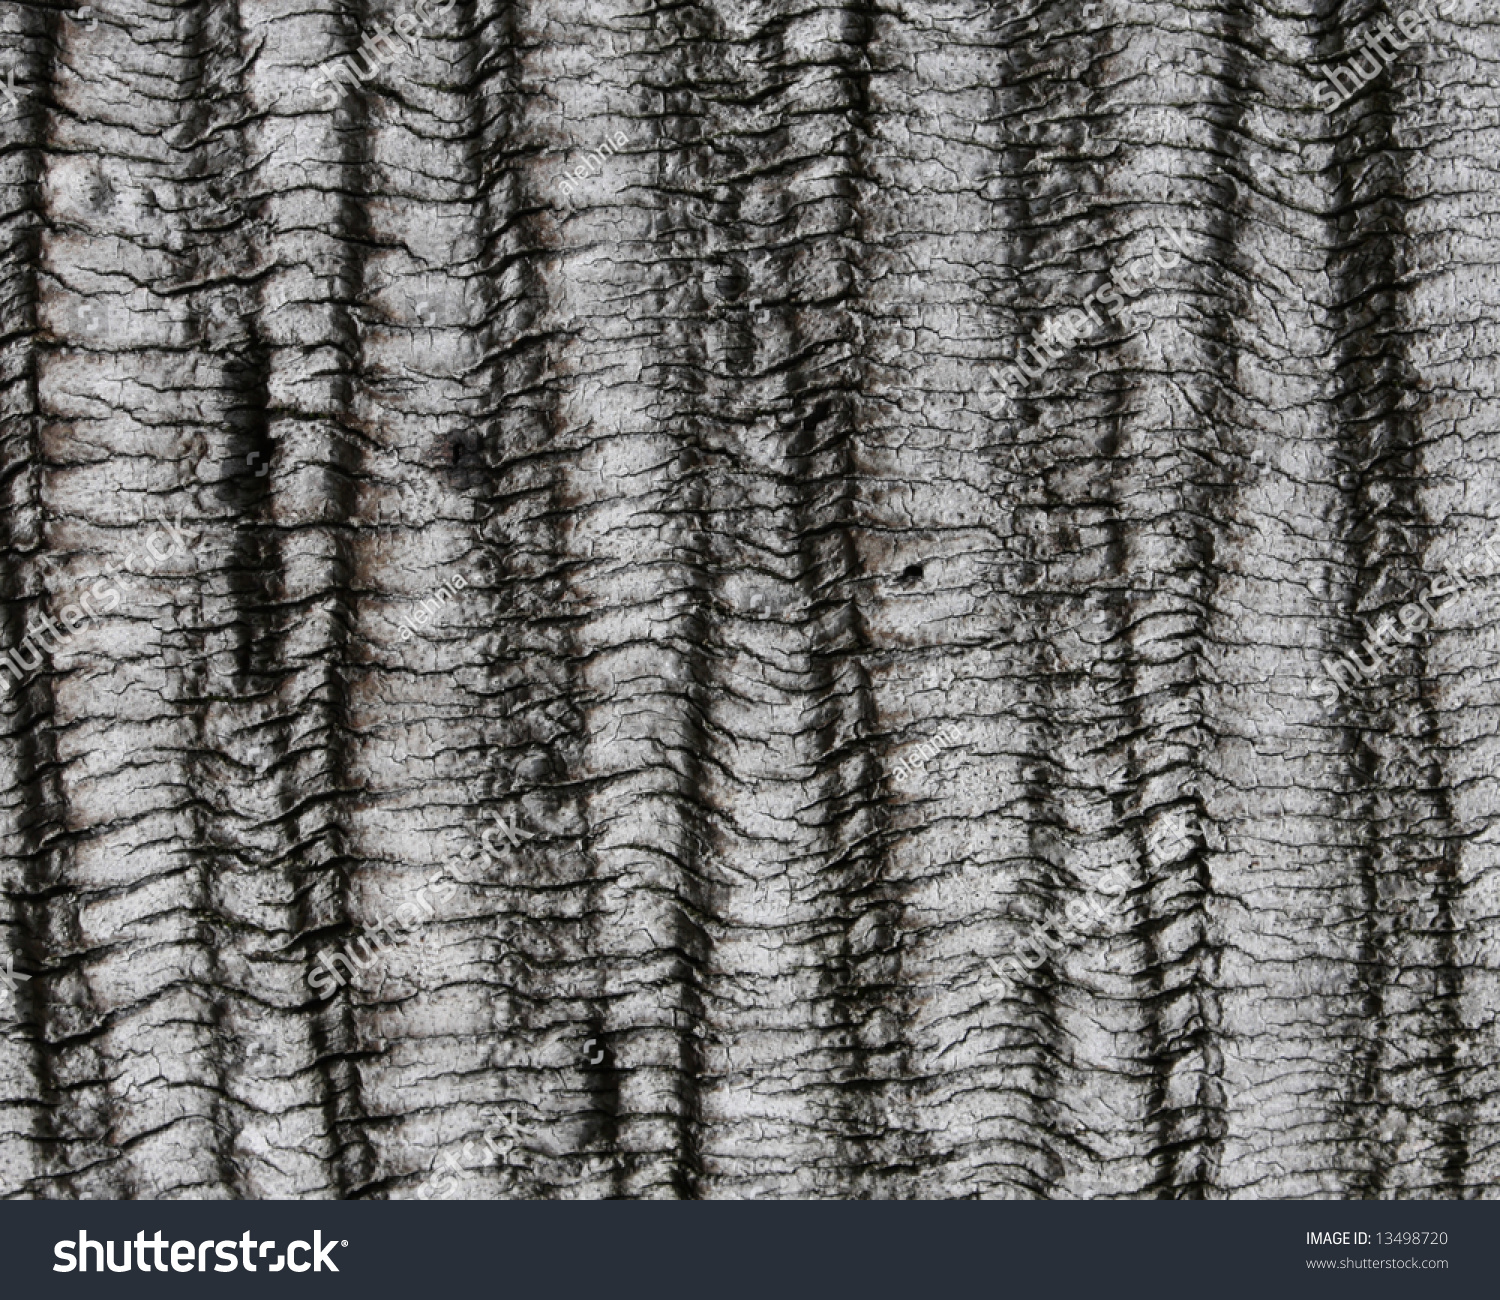 Abstract Old Wood Crust Texture Stock Photo 13498720 - Shutterstock